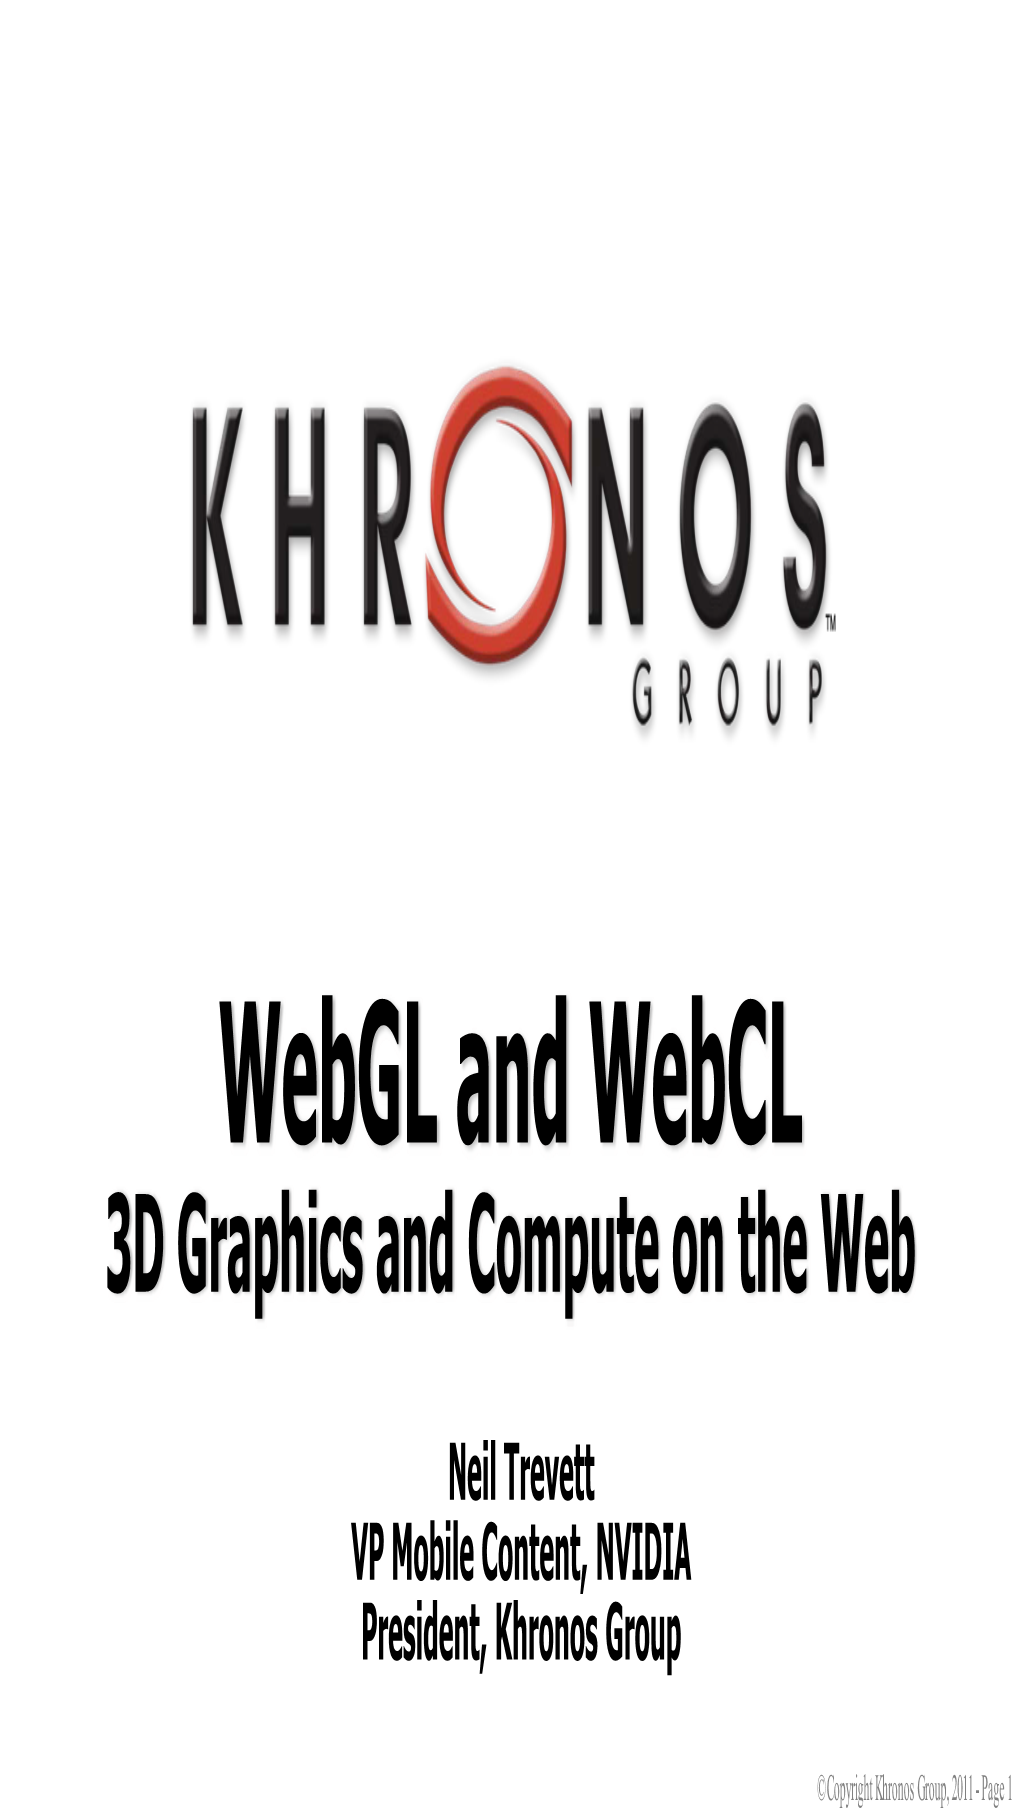 Webgl and Webcl 3D Graphics and Compute on the Web